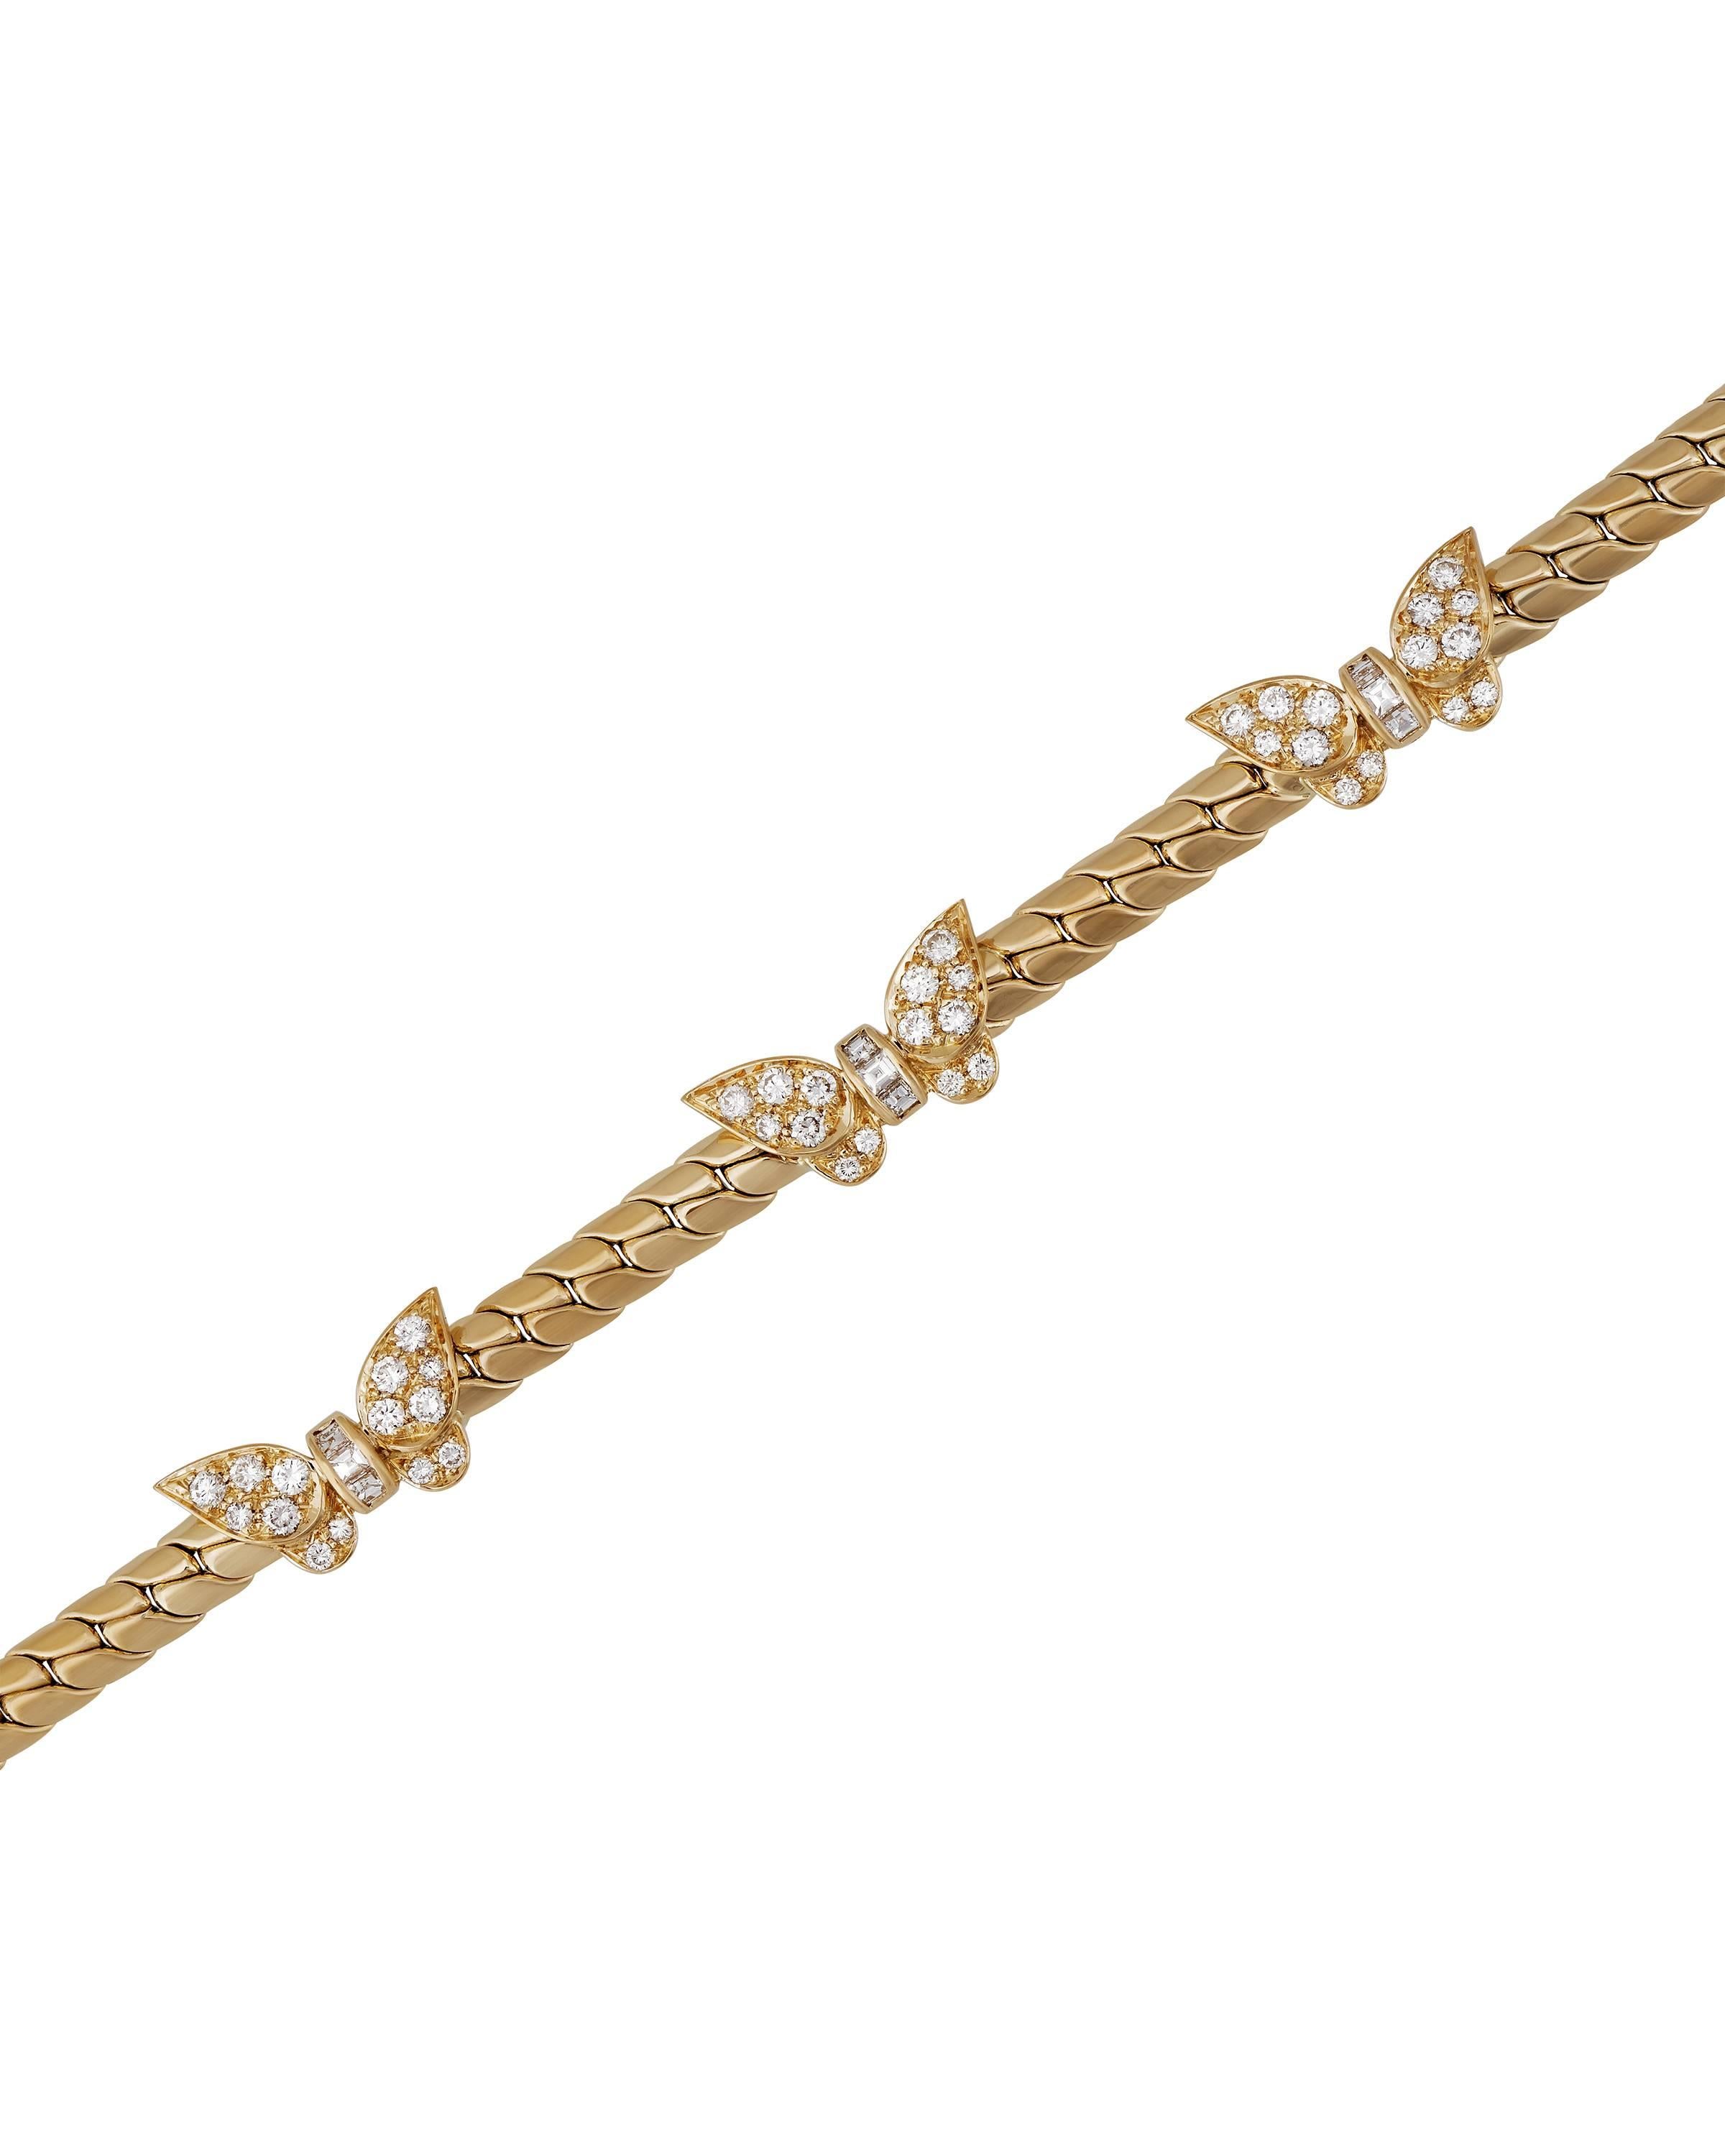 Metal: 18K Yellow Gold
Weight: 35.6g
TCW: 1.77ct
Length: 18in
